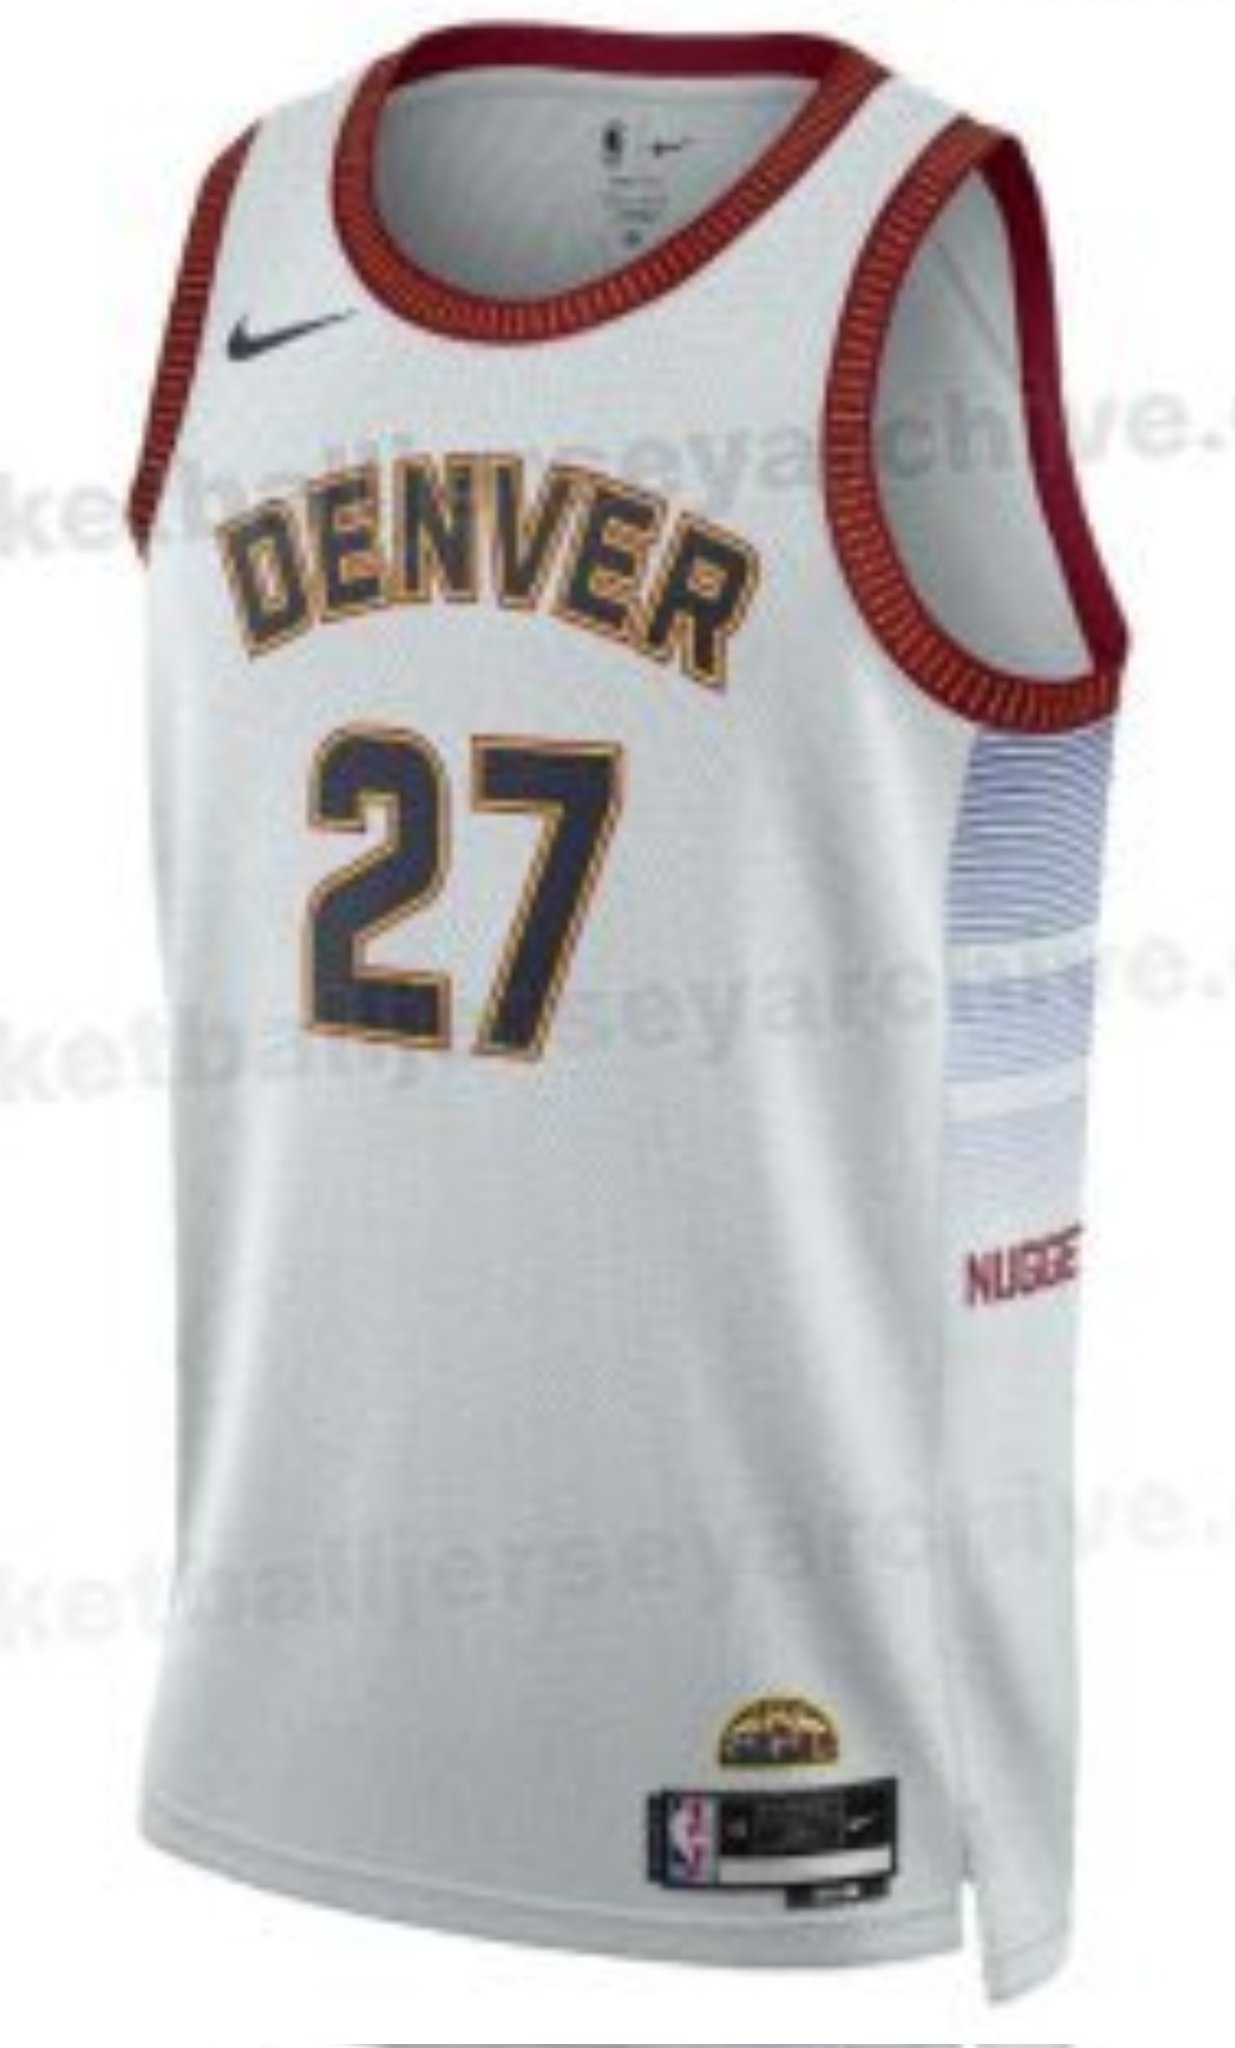 Jersey you wish they'd bring back? : r/denvernuggets